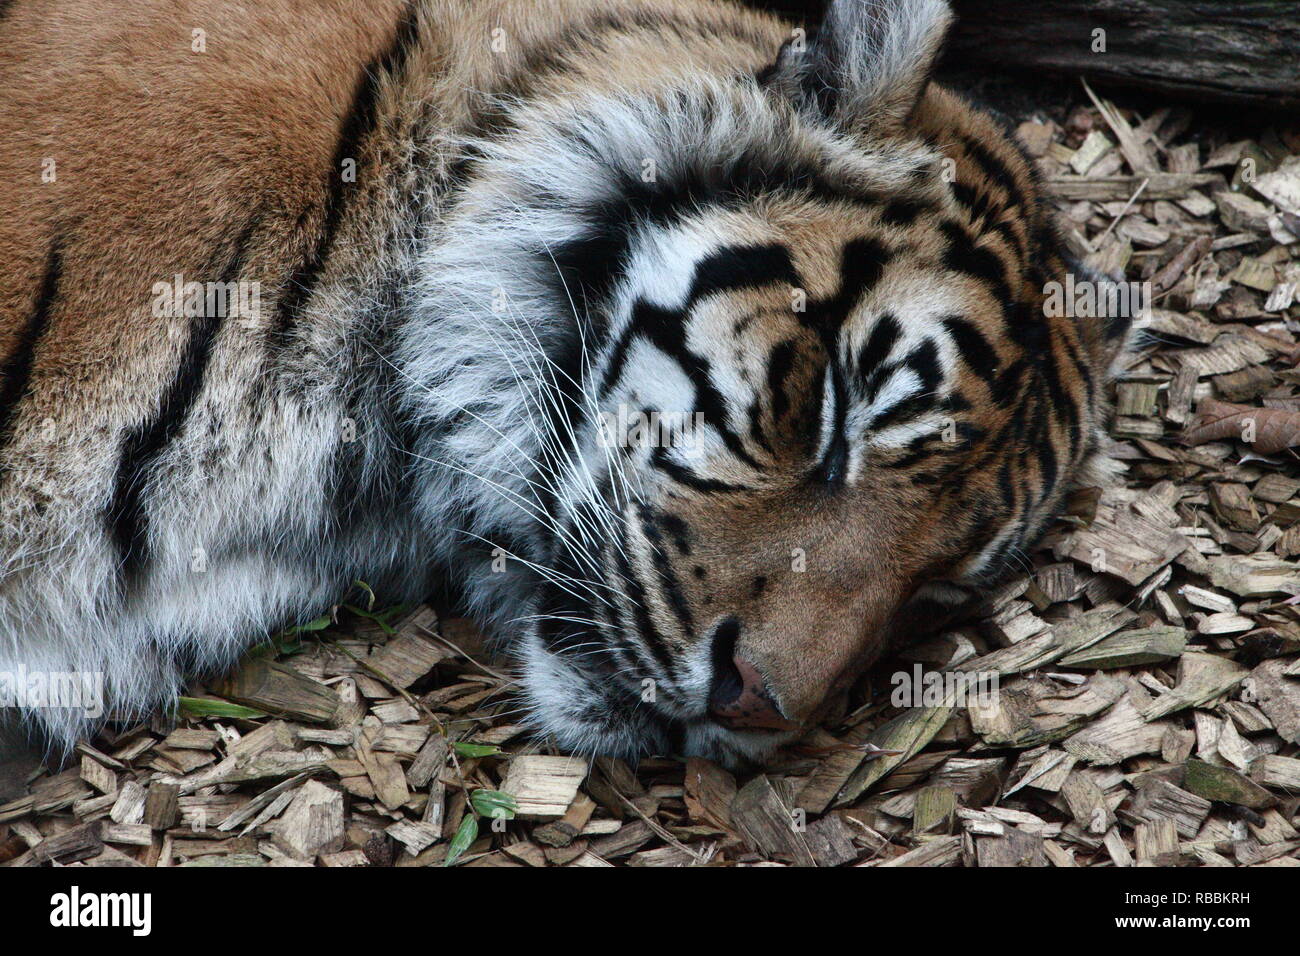 Face of sleeping tiger on ground Stock Photo